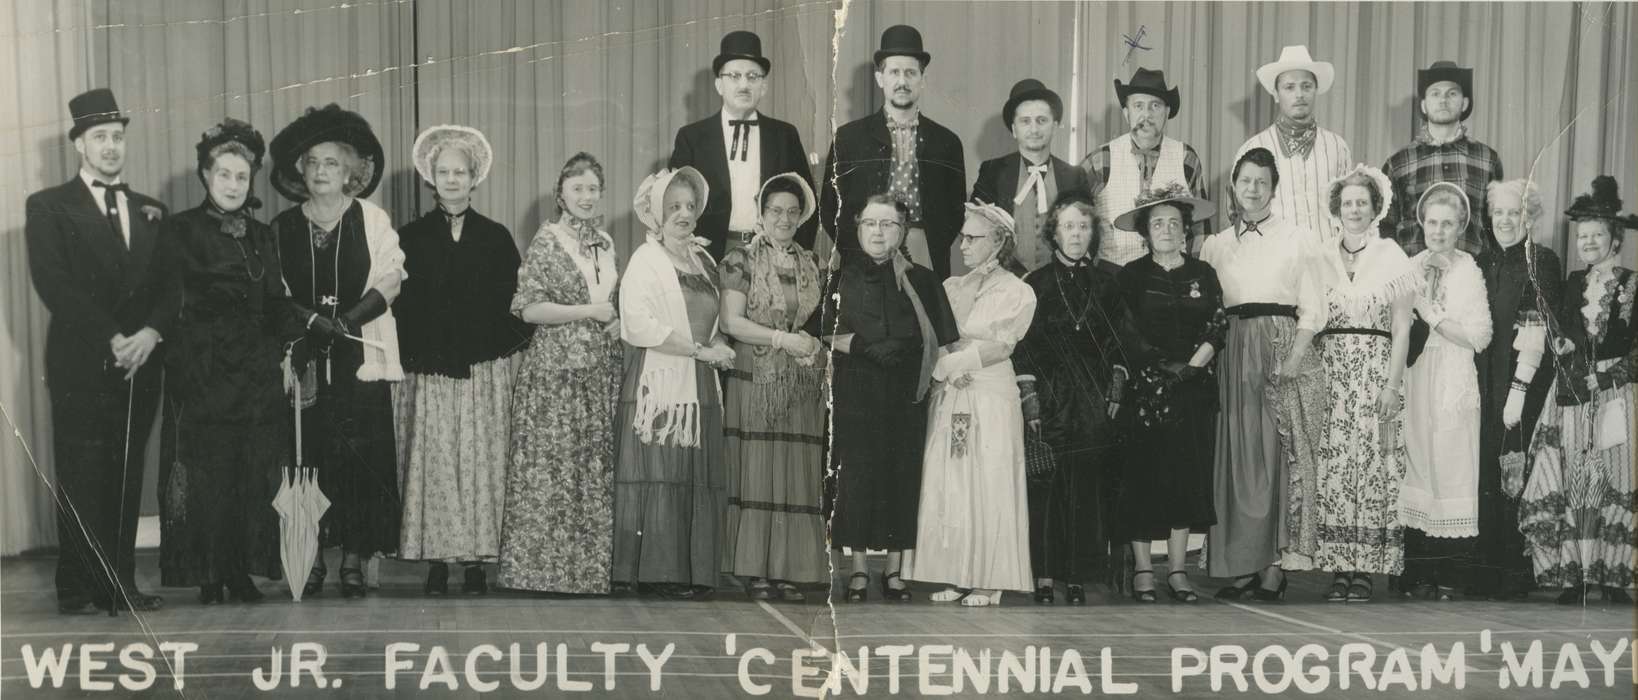 play, Sioux City, IA, Schools and Education, Entertainment, Iowa, Iowa History, performance, Rossiter, Lynn, cowboy hat, stage, Portraits - Group, umbrella, history of Iowa